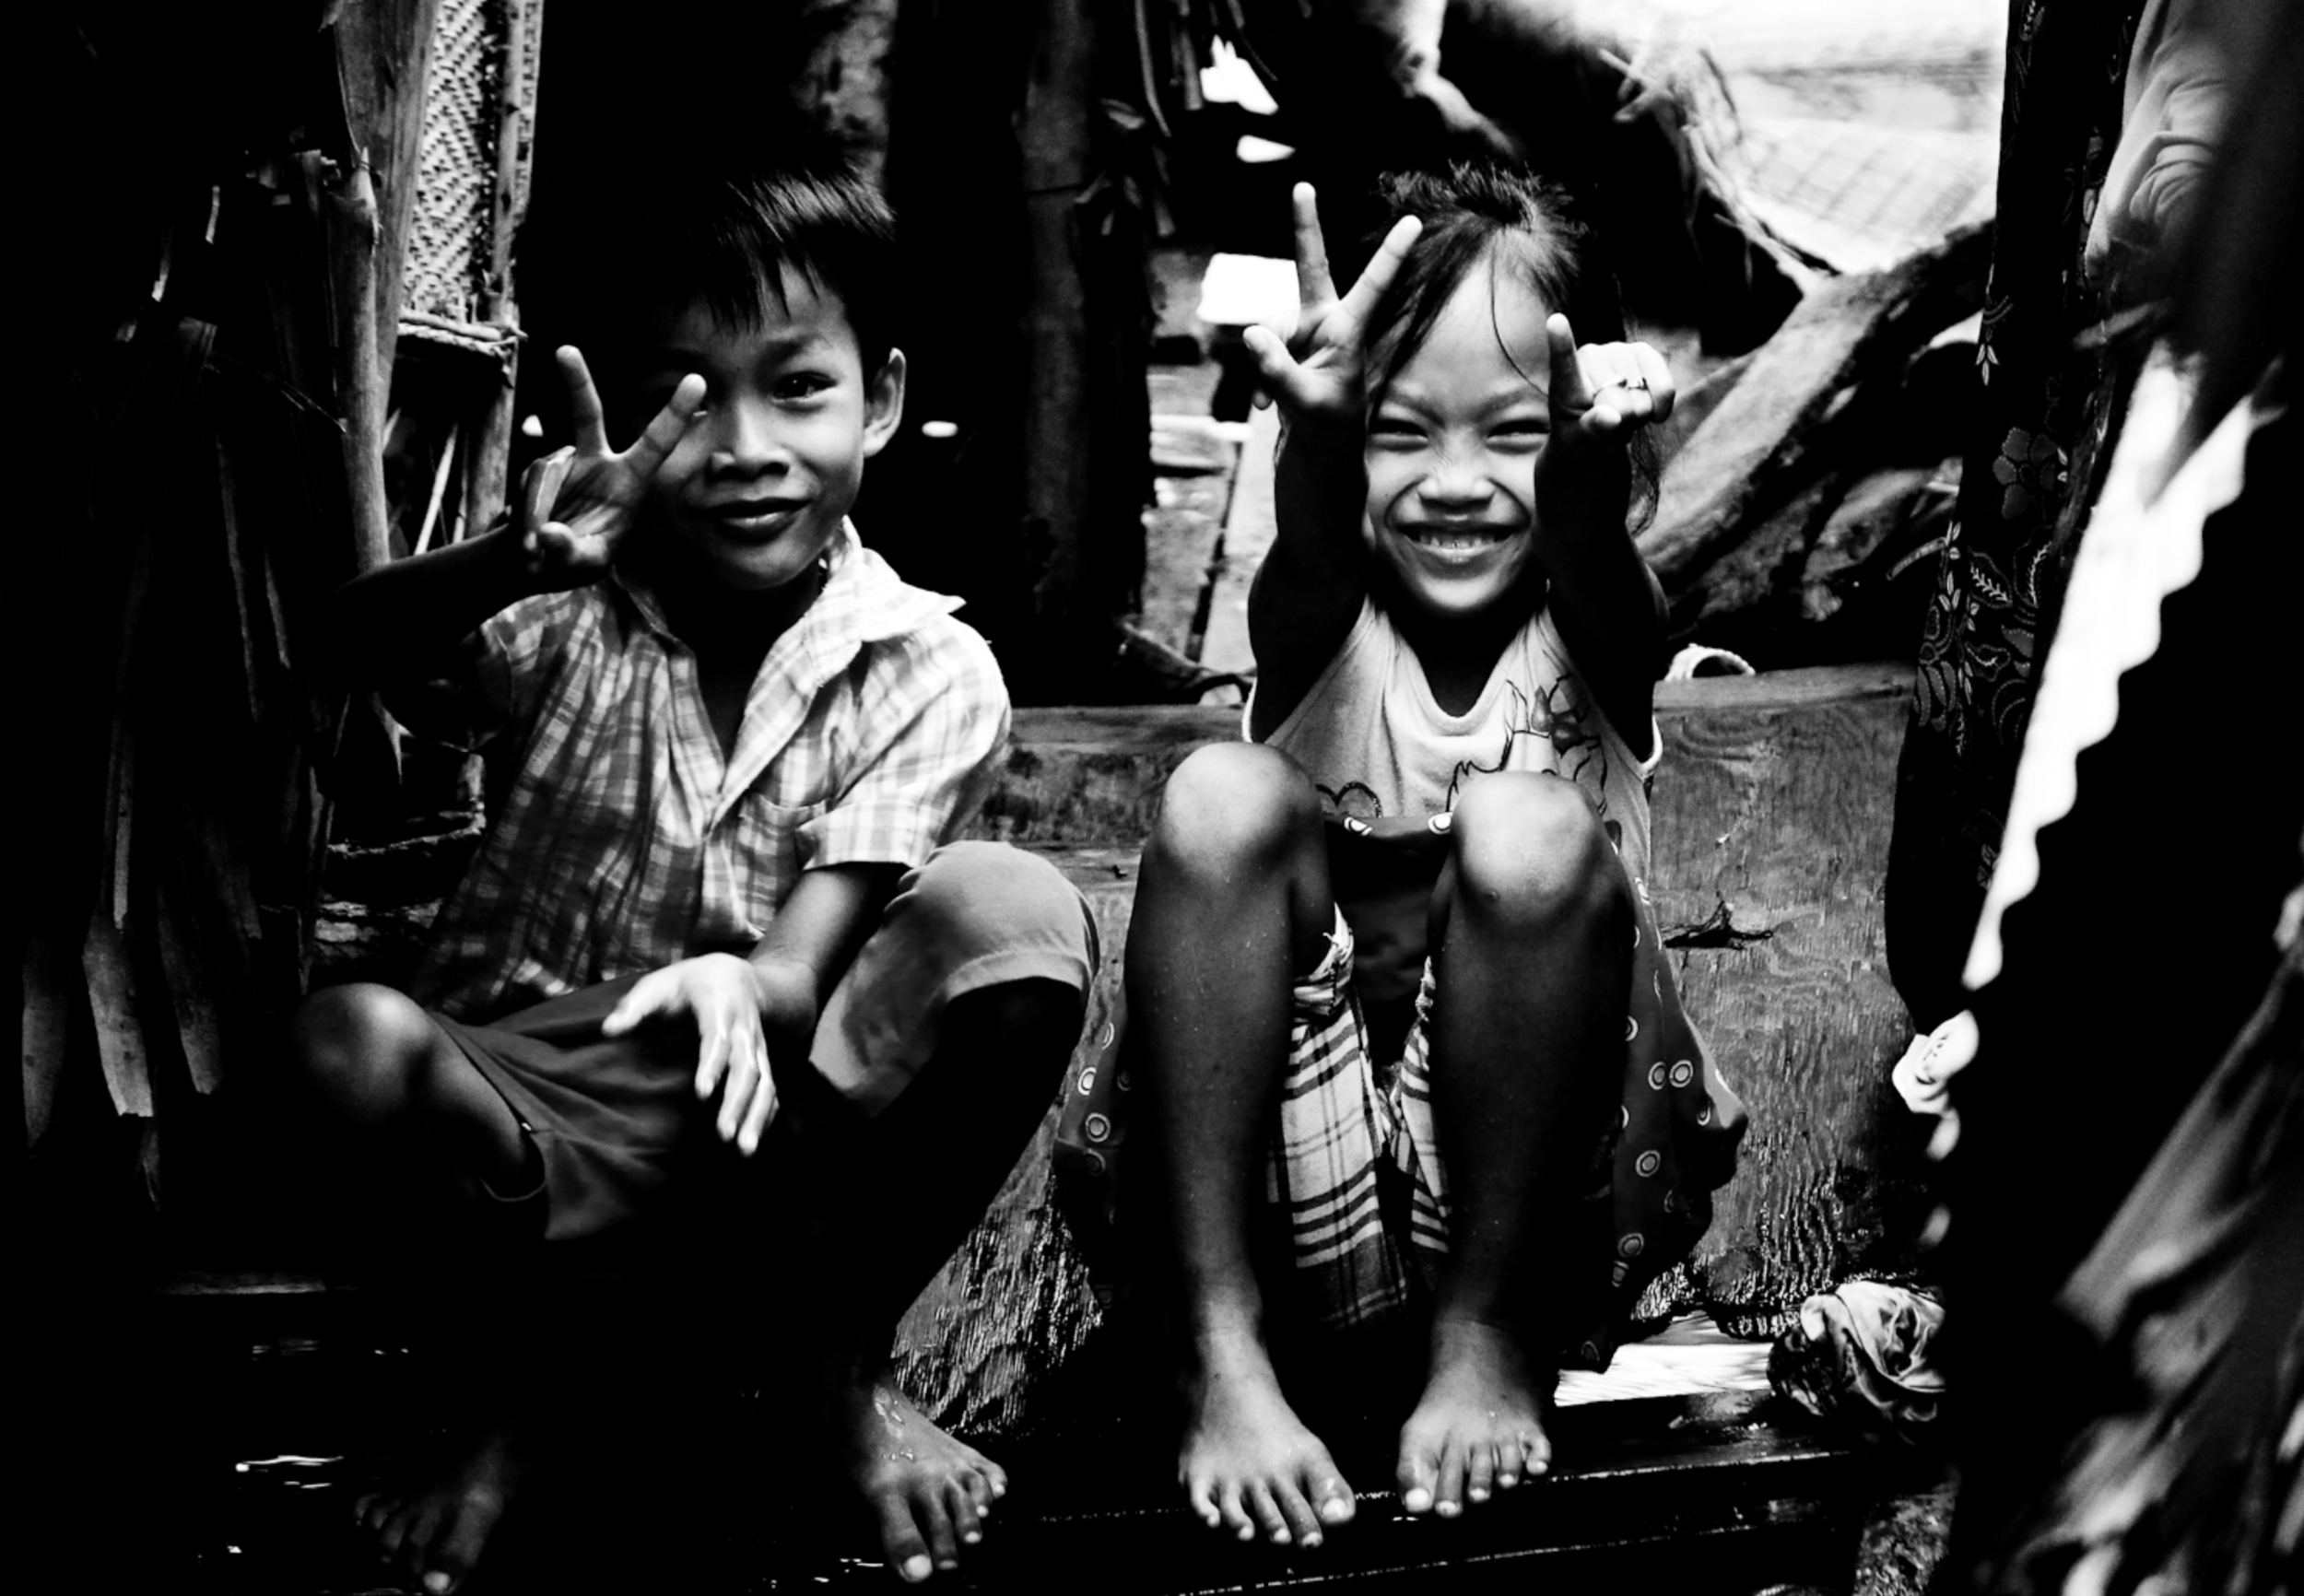  Though exact figures are impossible to come by leading human rights organizations estimate that there are as many as 30,000 child sex workers in Cambodia. In 2007 CNN reported on children as young as 6 sold to brothels for as little as $10 and often